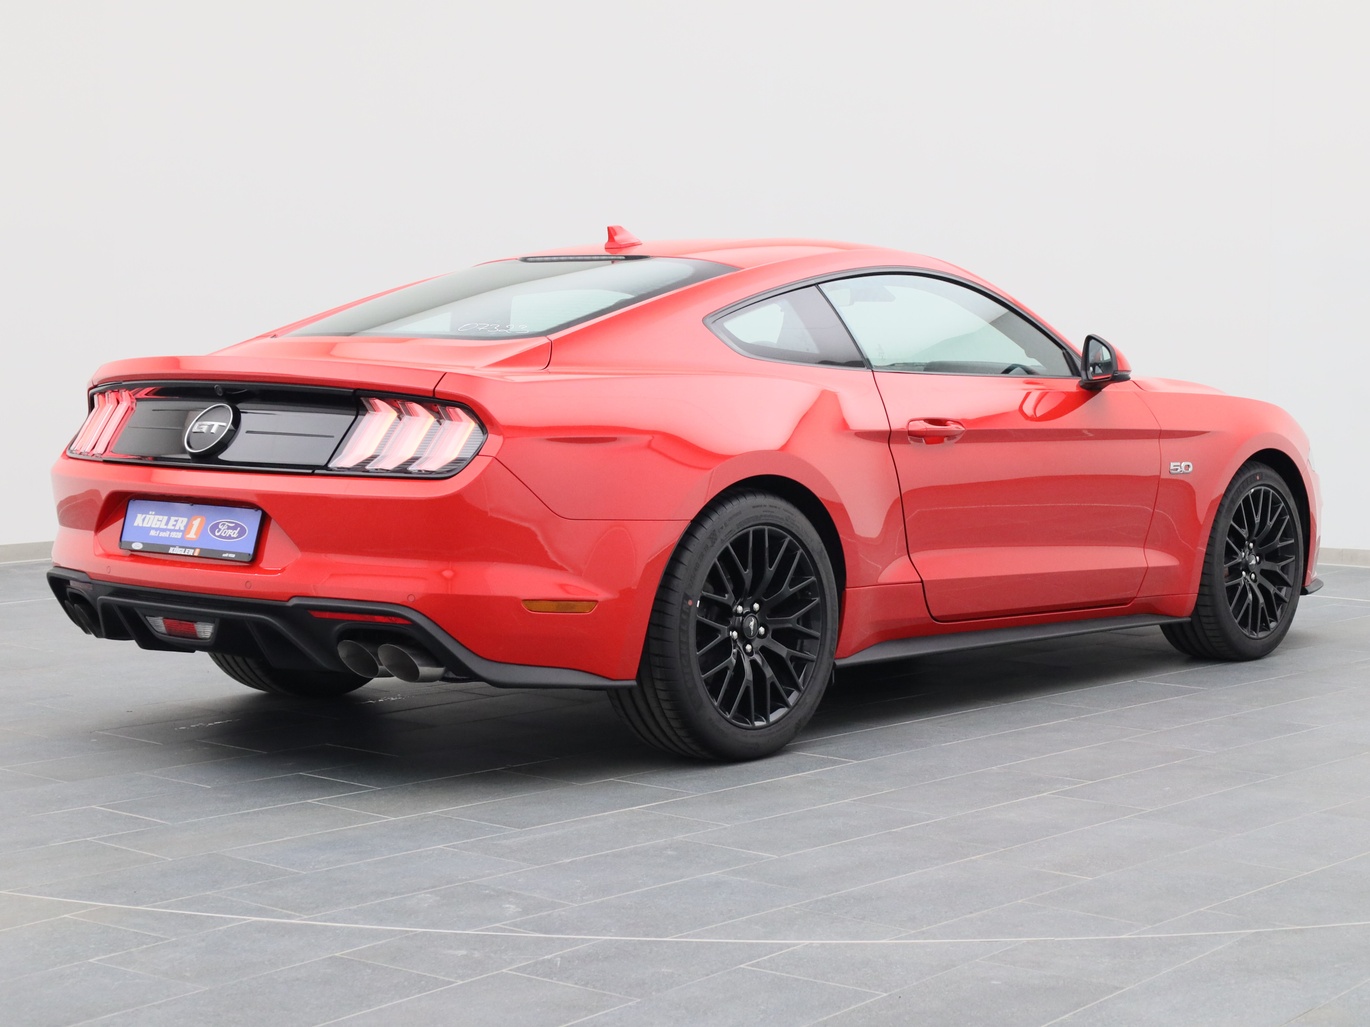  Ford Mustang GT Coupé V8 450PS Aut / Premium 2 in Race-rot 